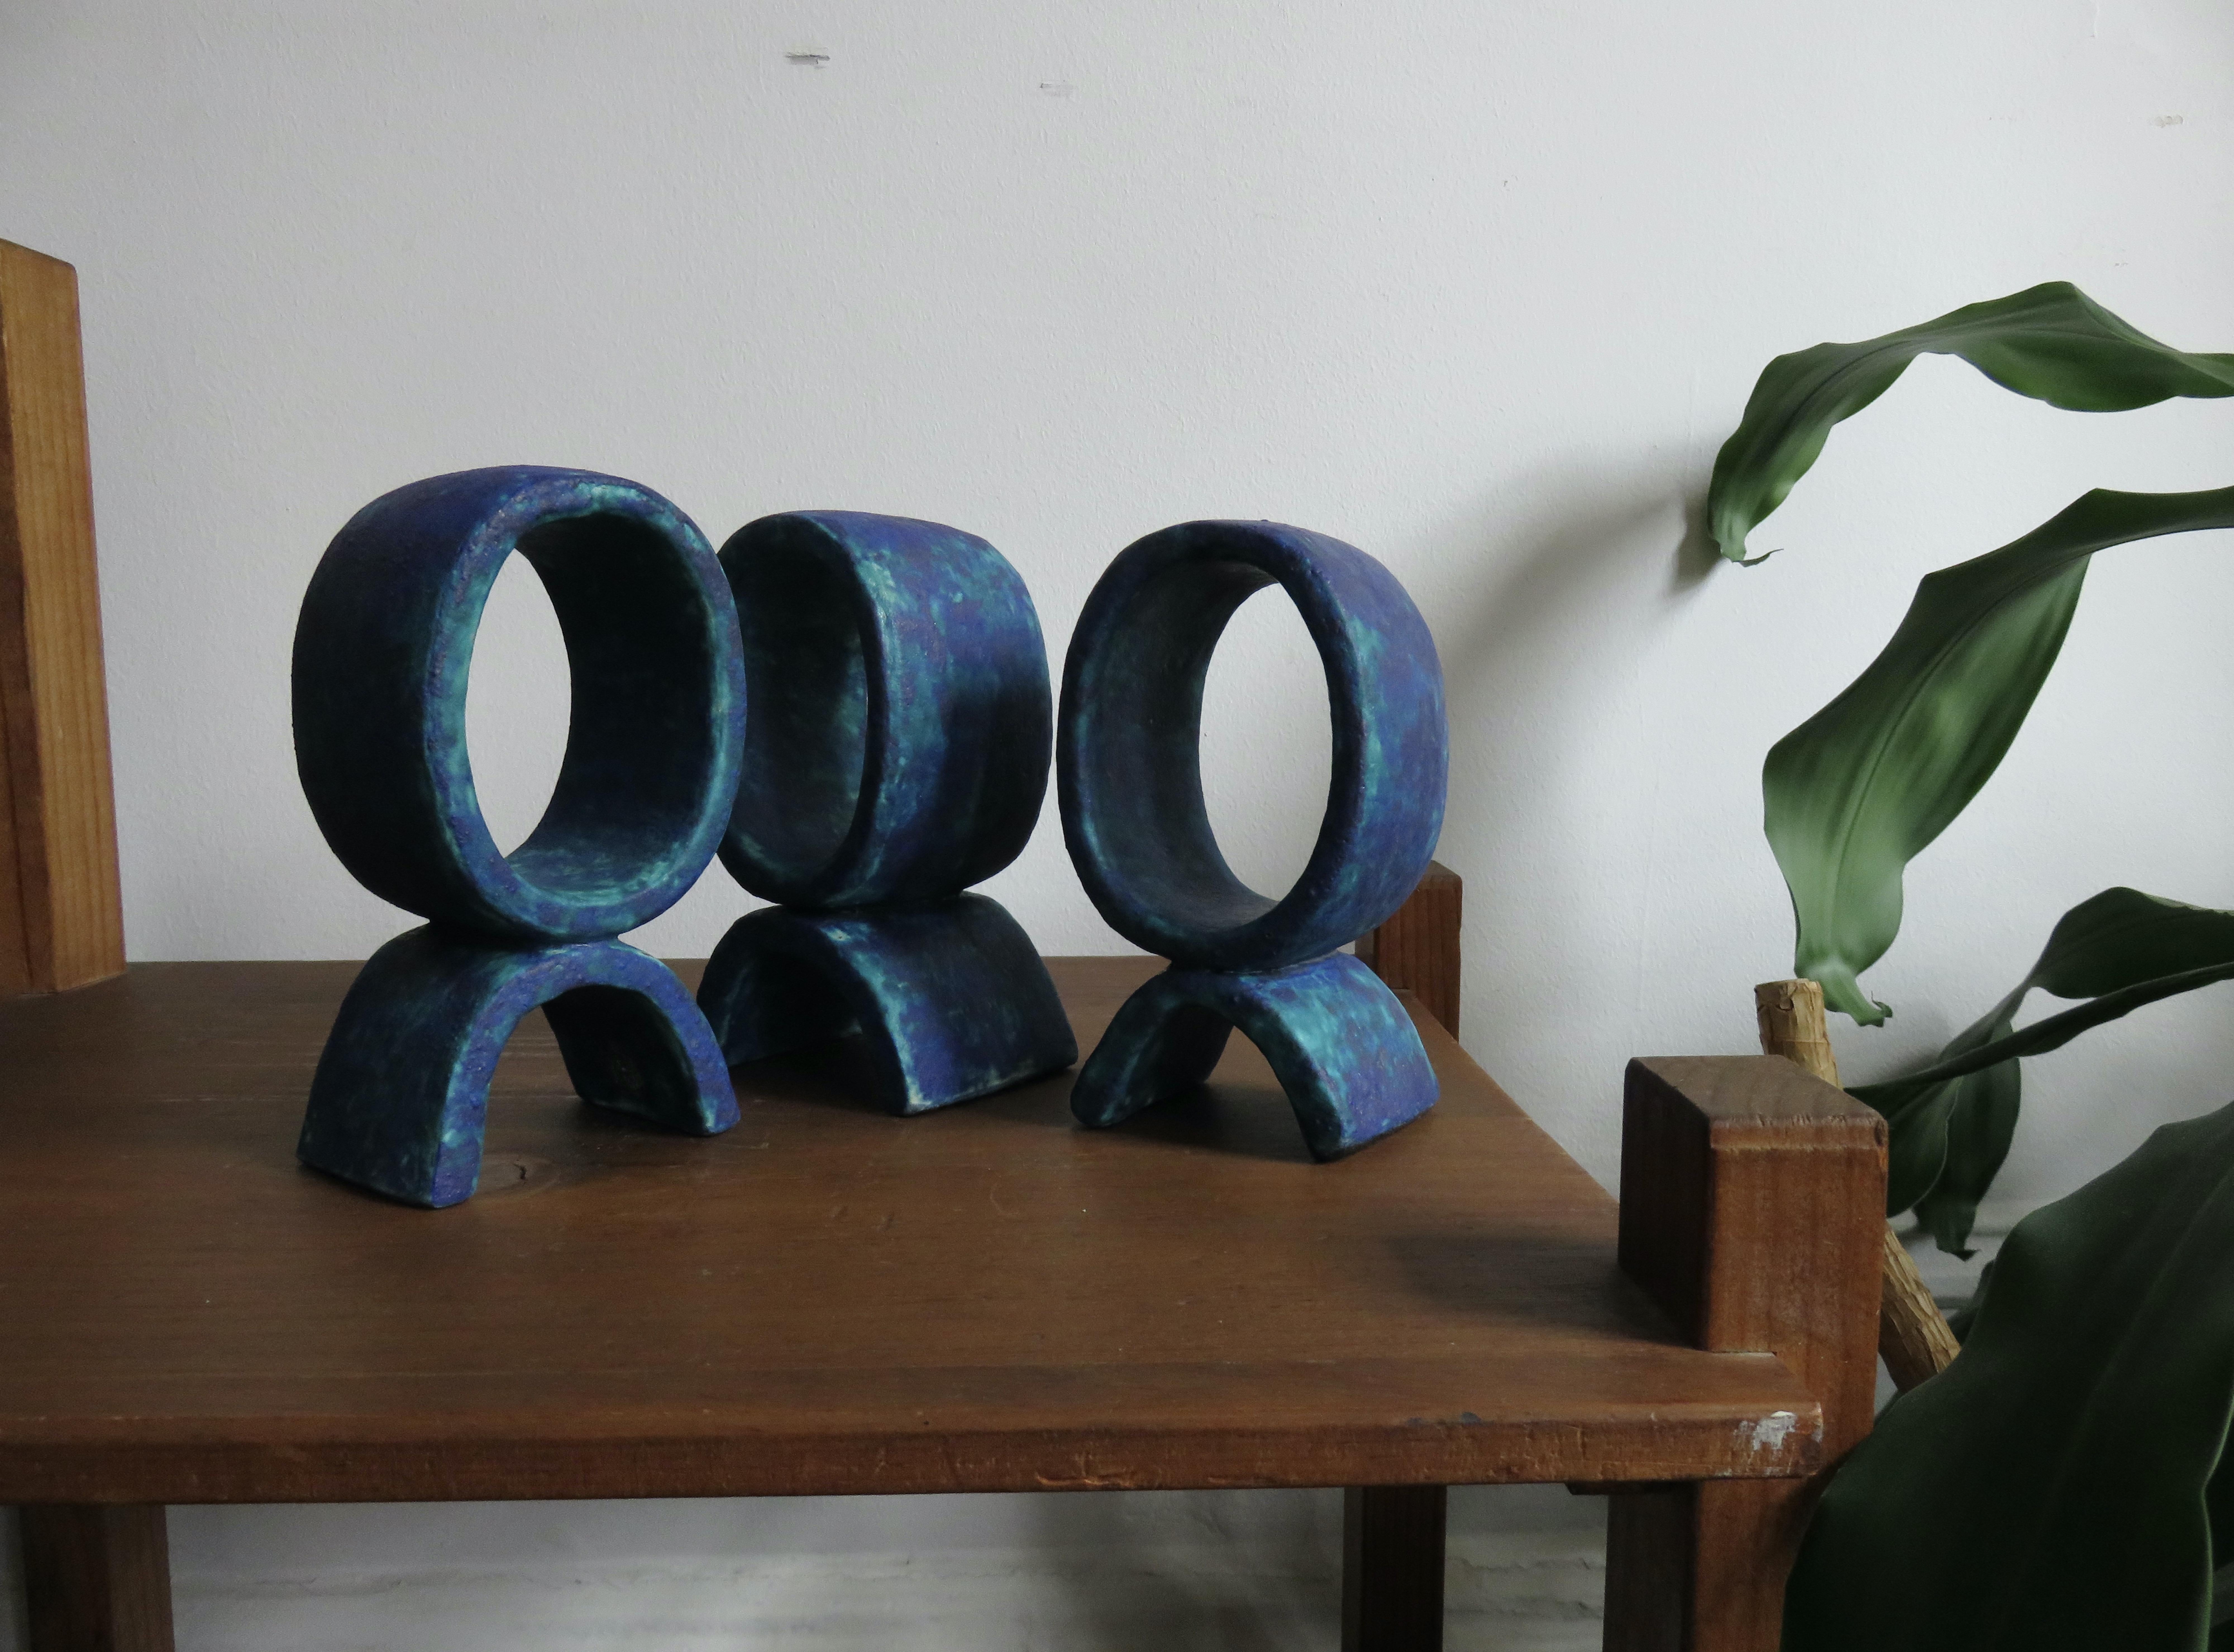 Mottled Turquoise and Deep Blue, 3 Ceramic Totems, Single Rings on Curved Legs For Sale 4